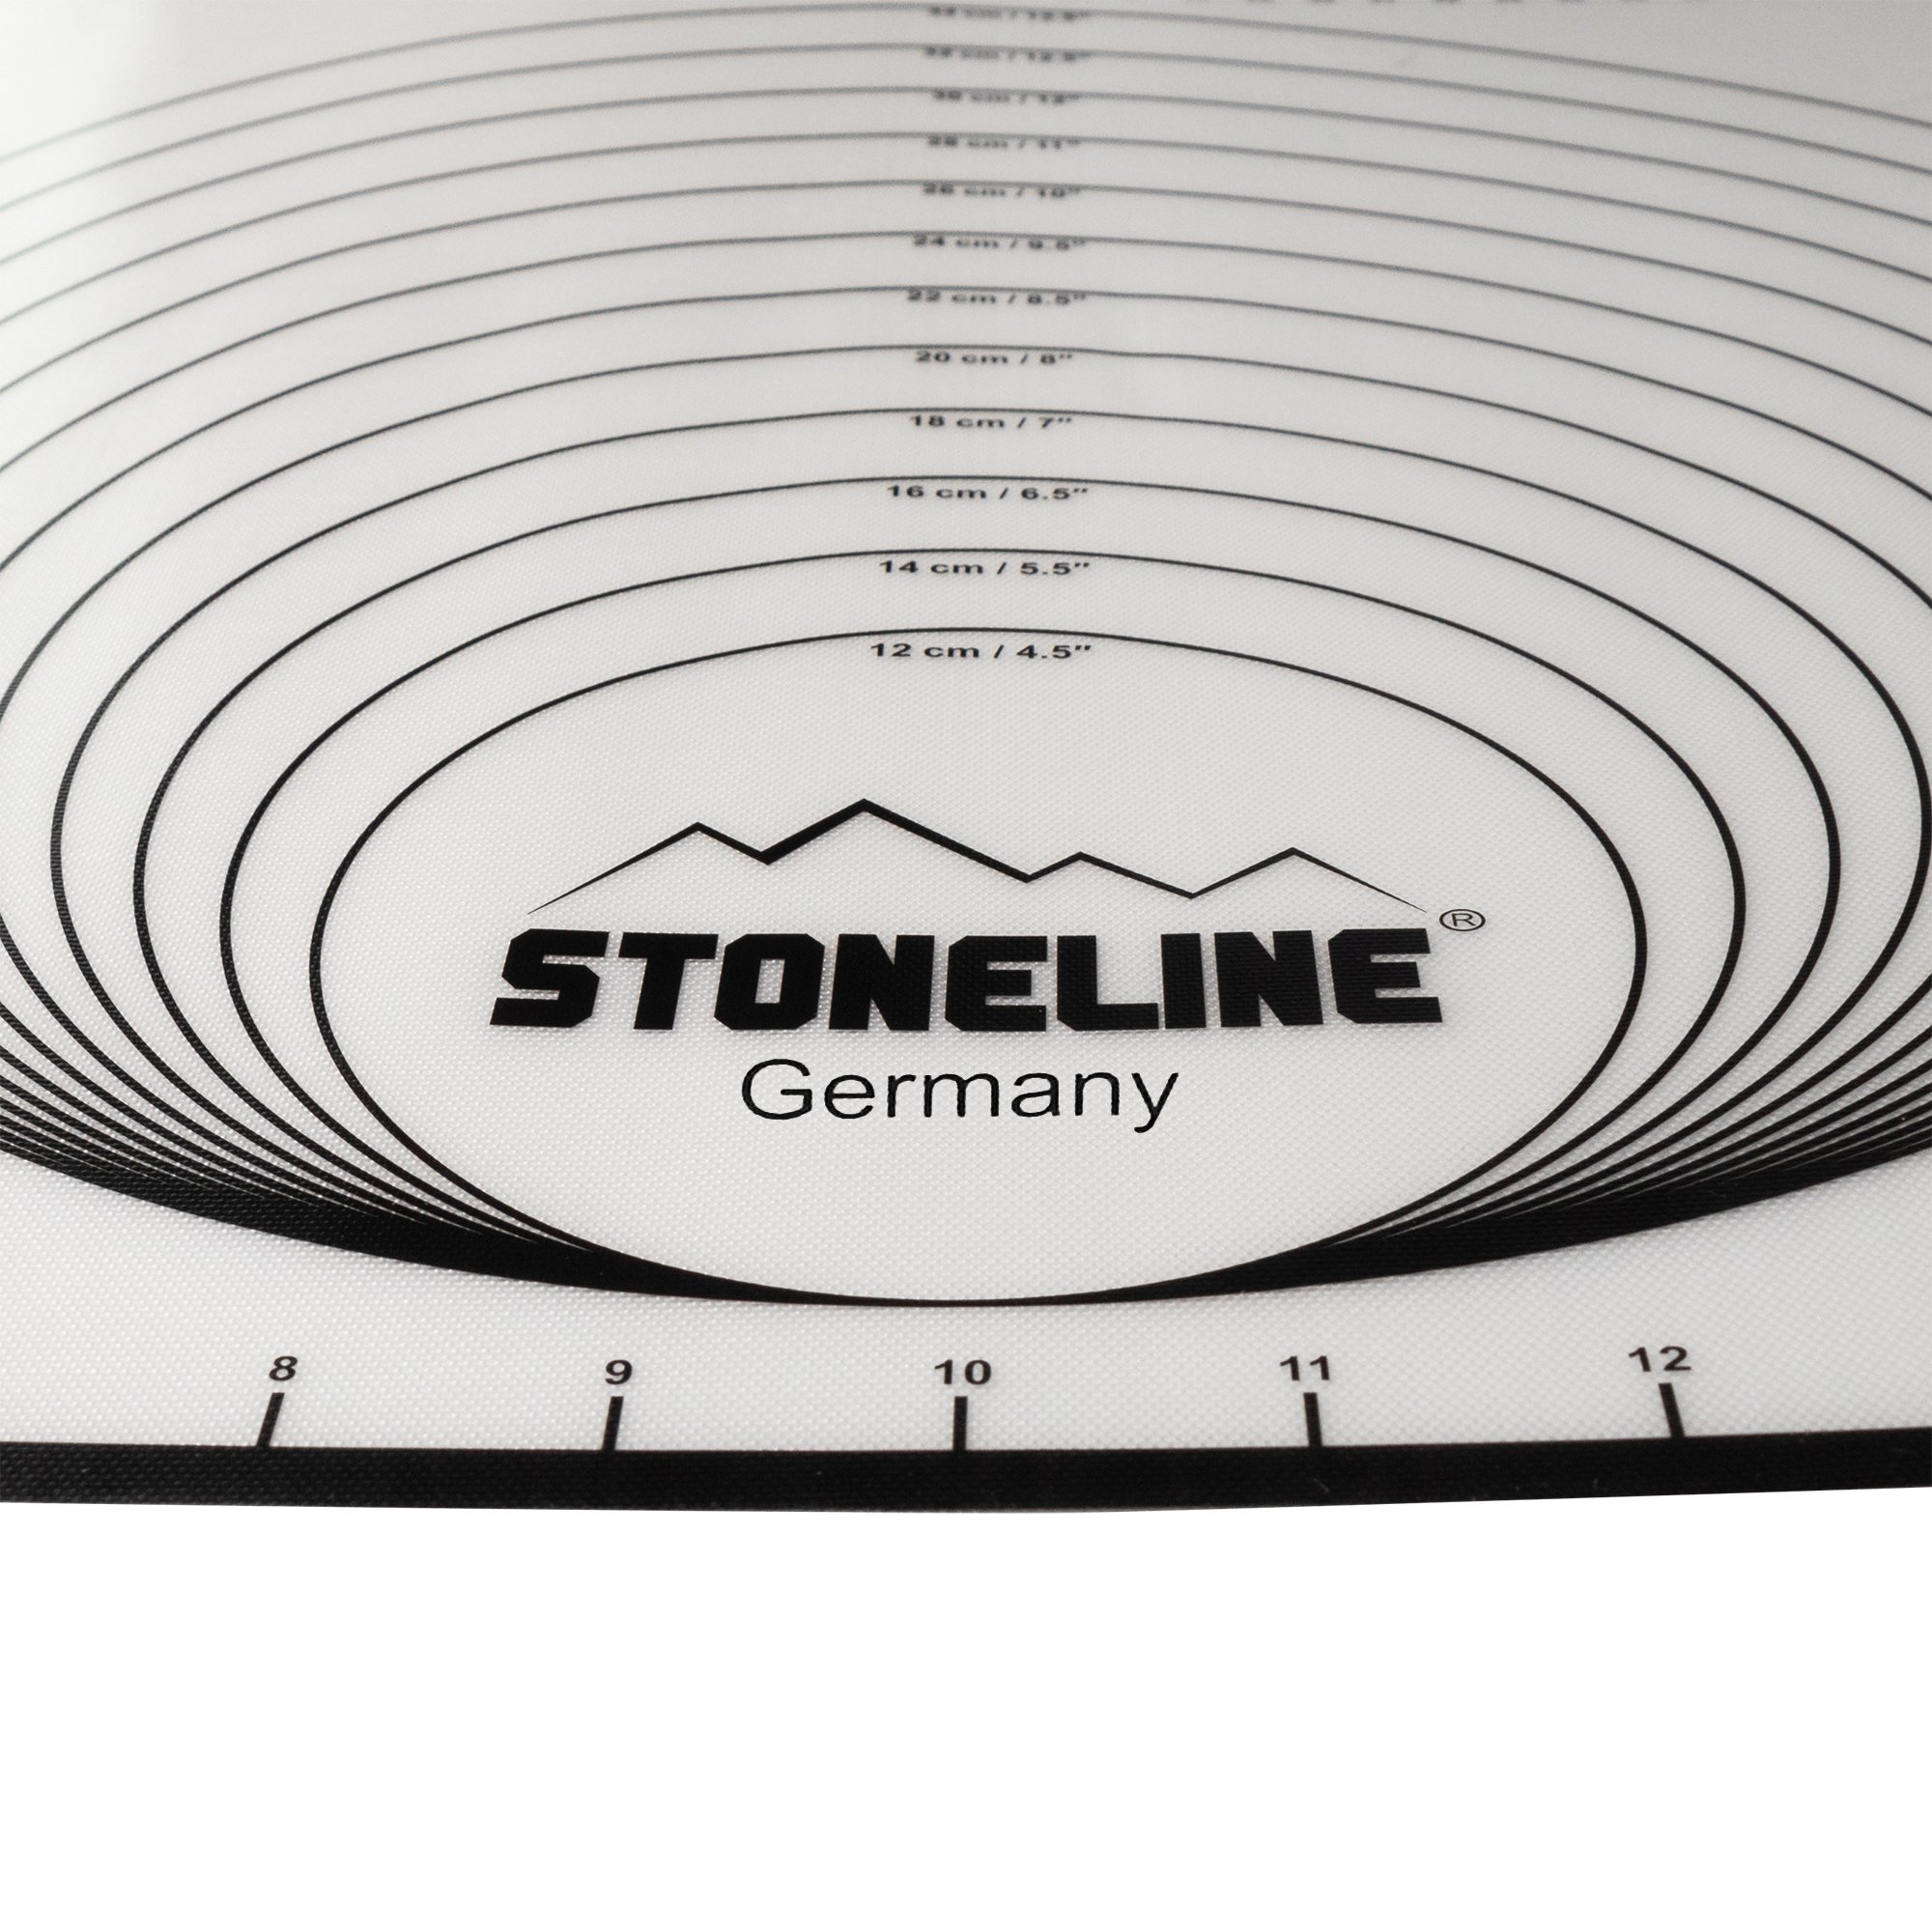 STONELINE® Silicone Baking Mat 60x40 cm, Non-Stick | Pastry Mat with Measurement